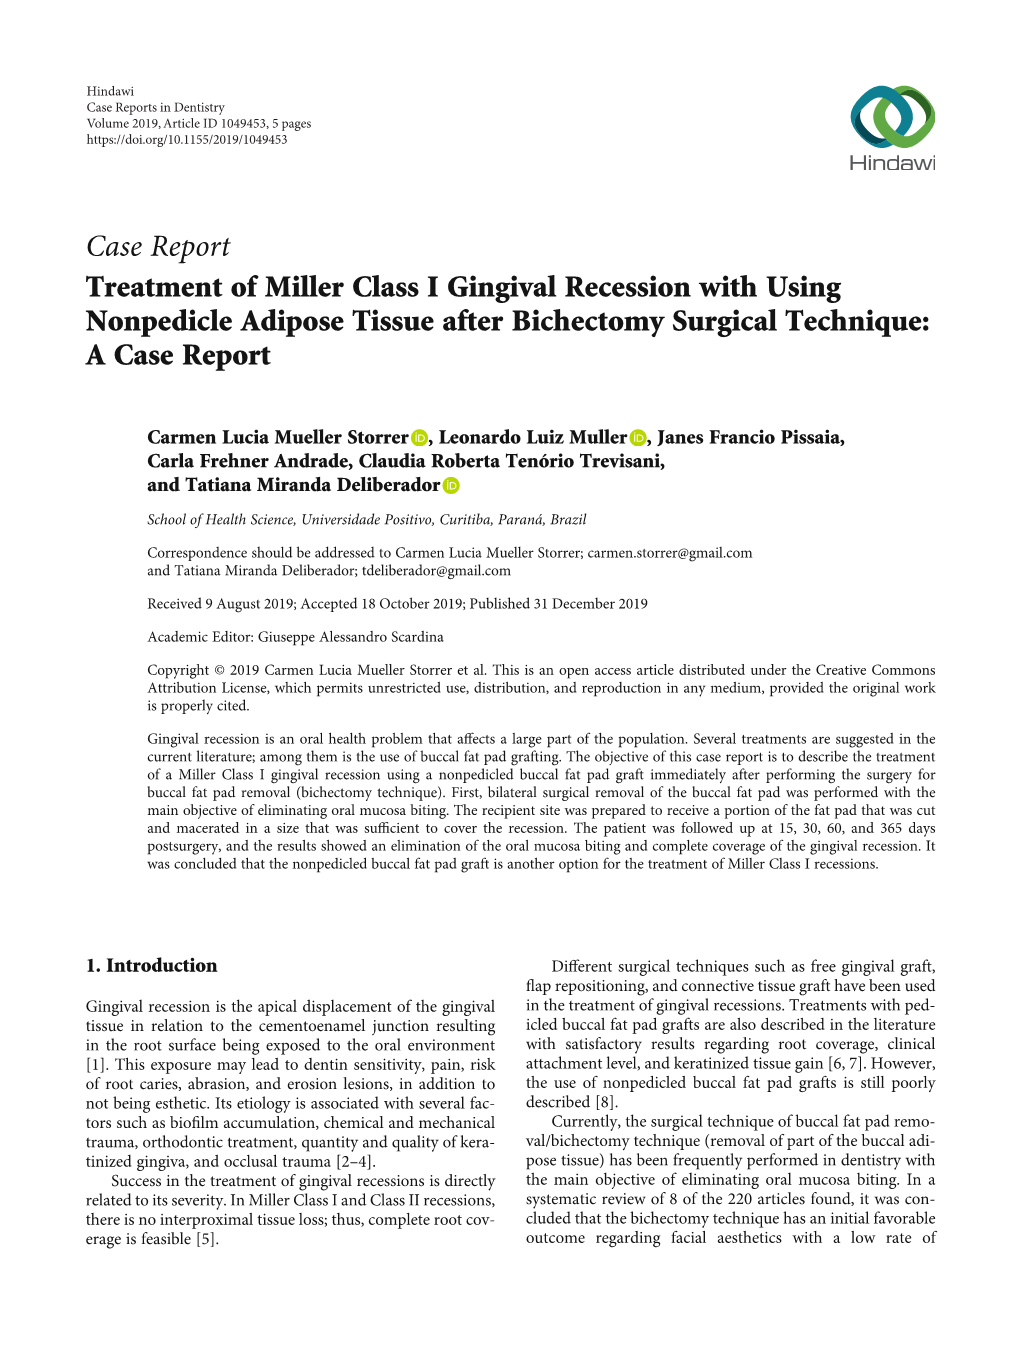 Treatment of Miller Class I Gingival Recession with Using Nonpedicle Adipose Tissue After Bichectomy Surgical Technique: a Case Report